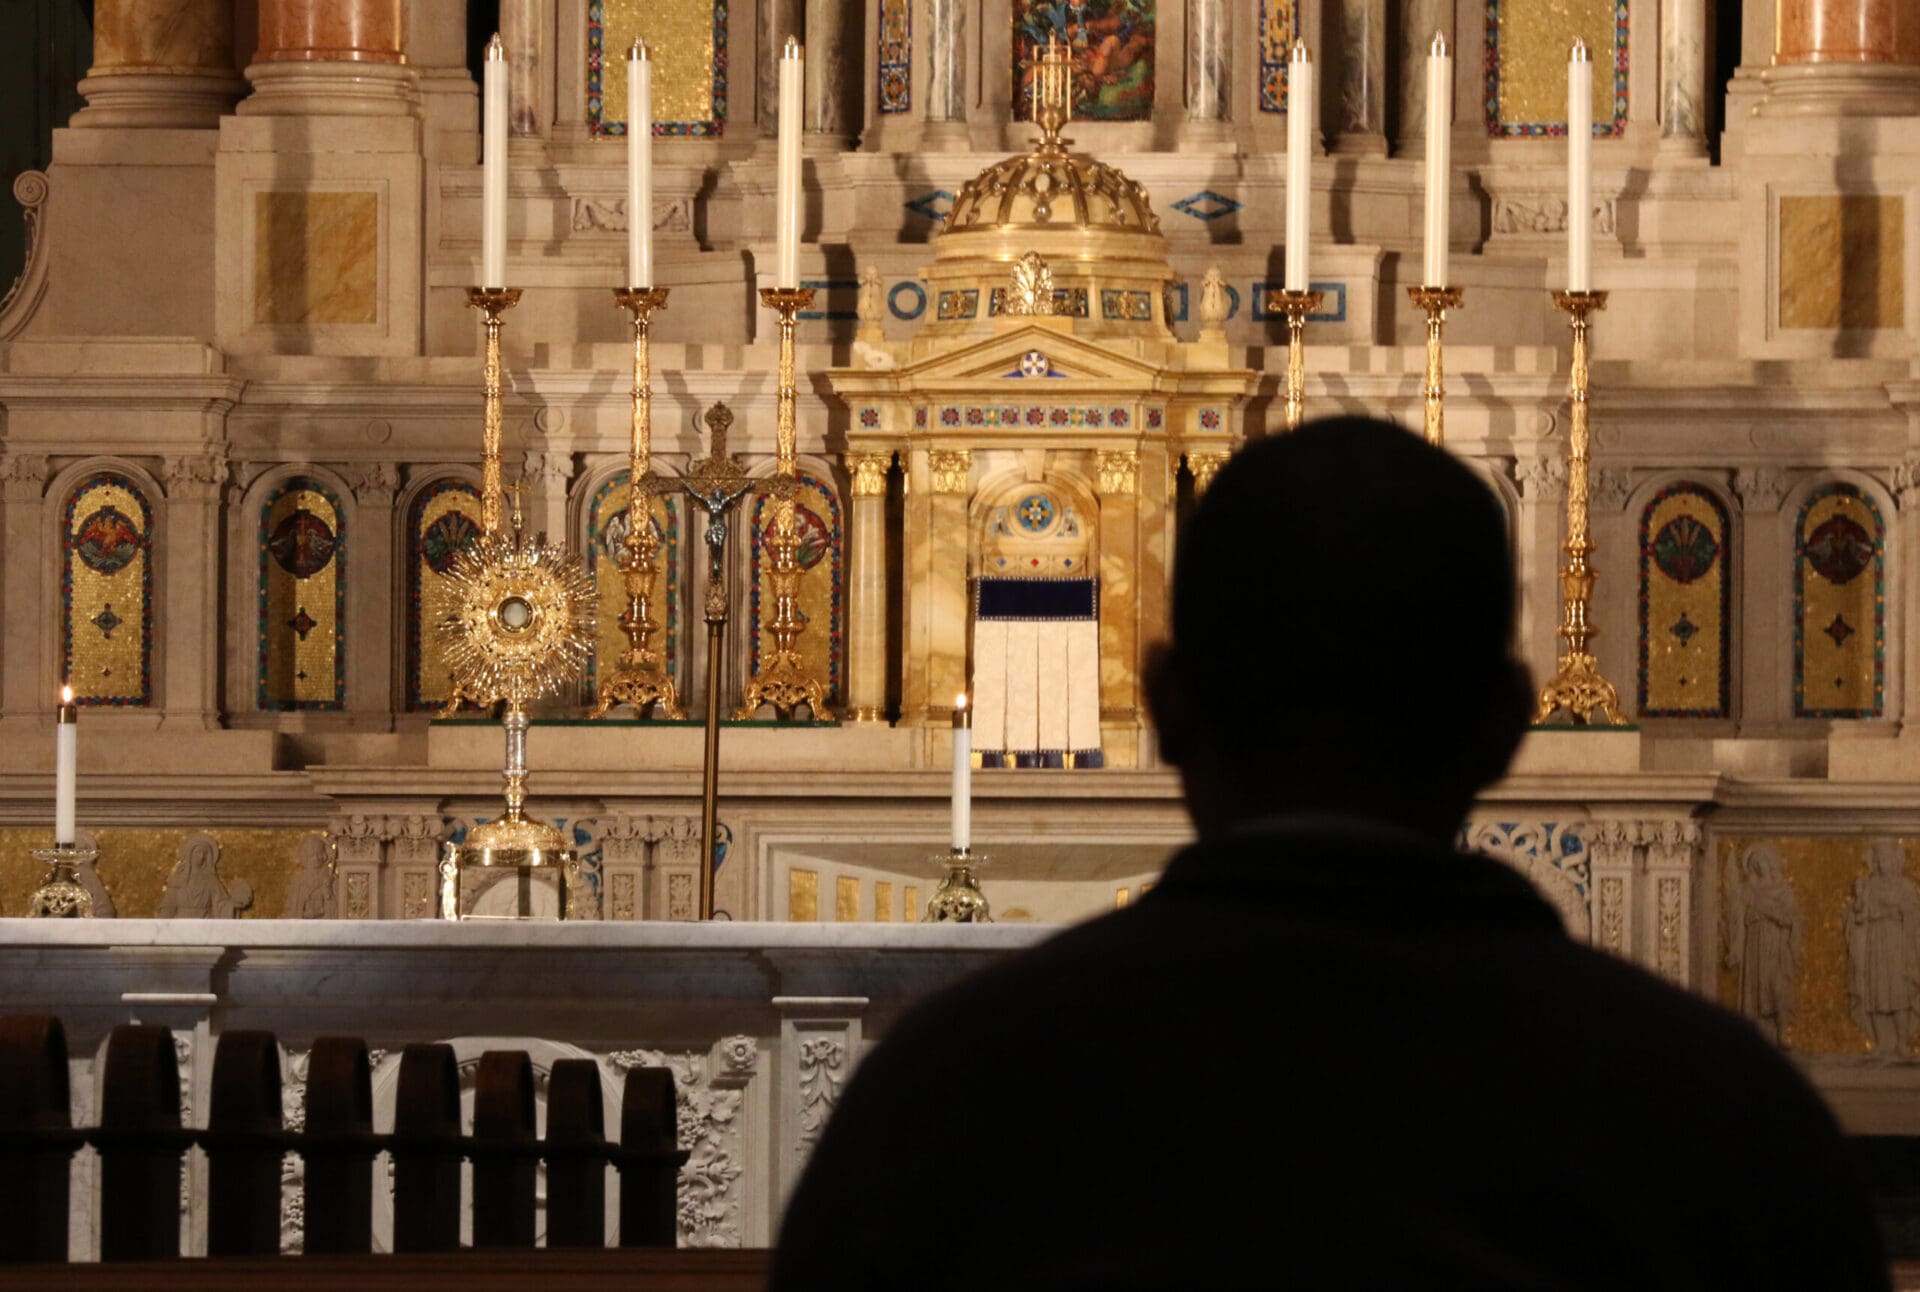 Q: Can you describe the different aspects of Eucharistic Adoration?